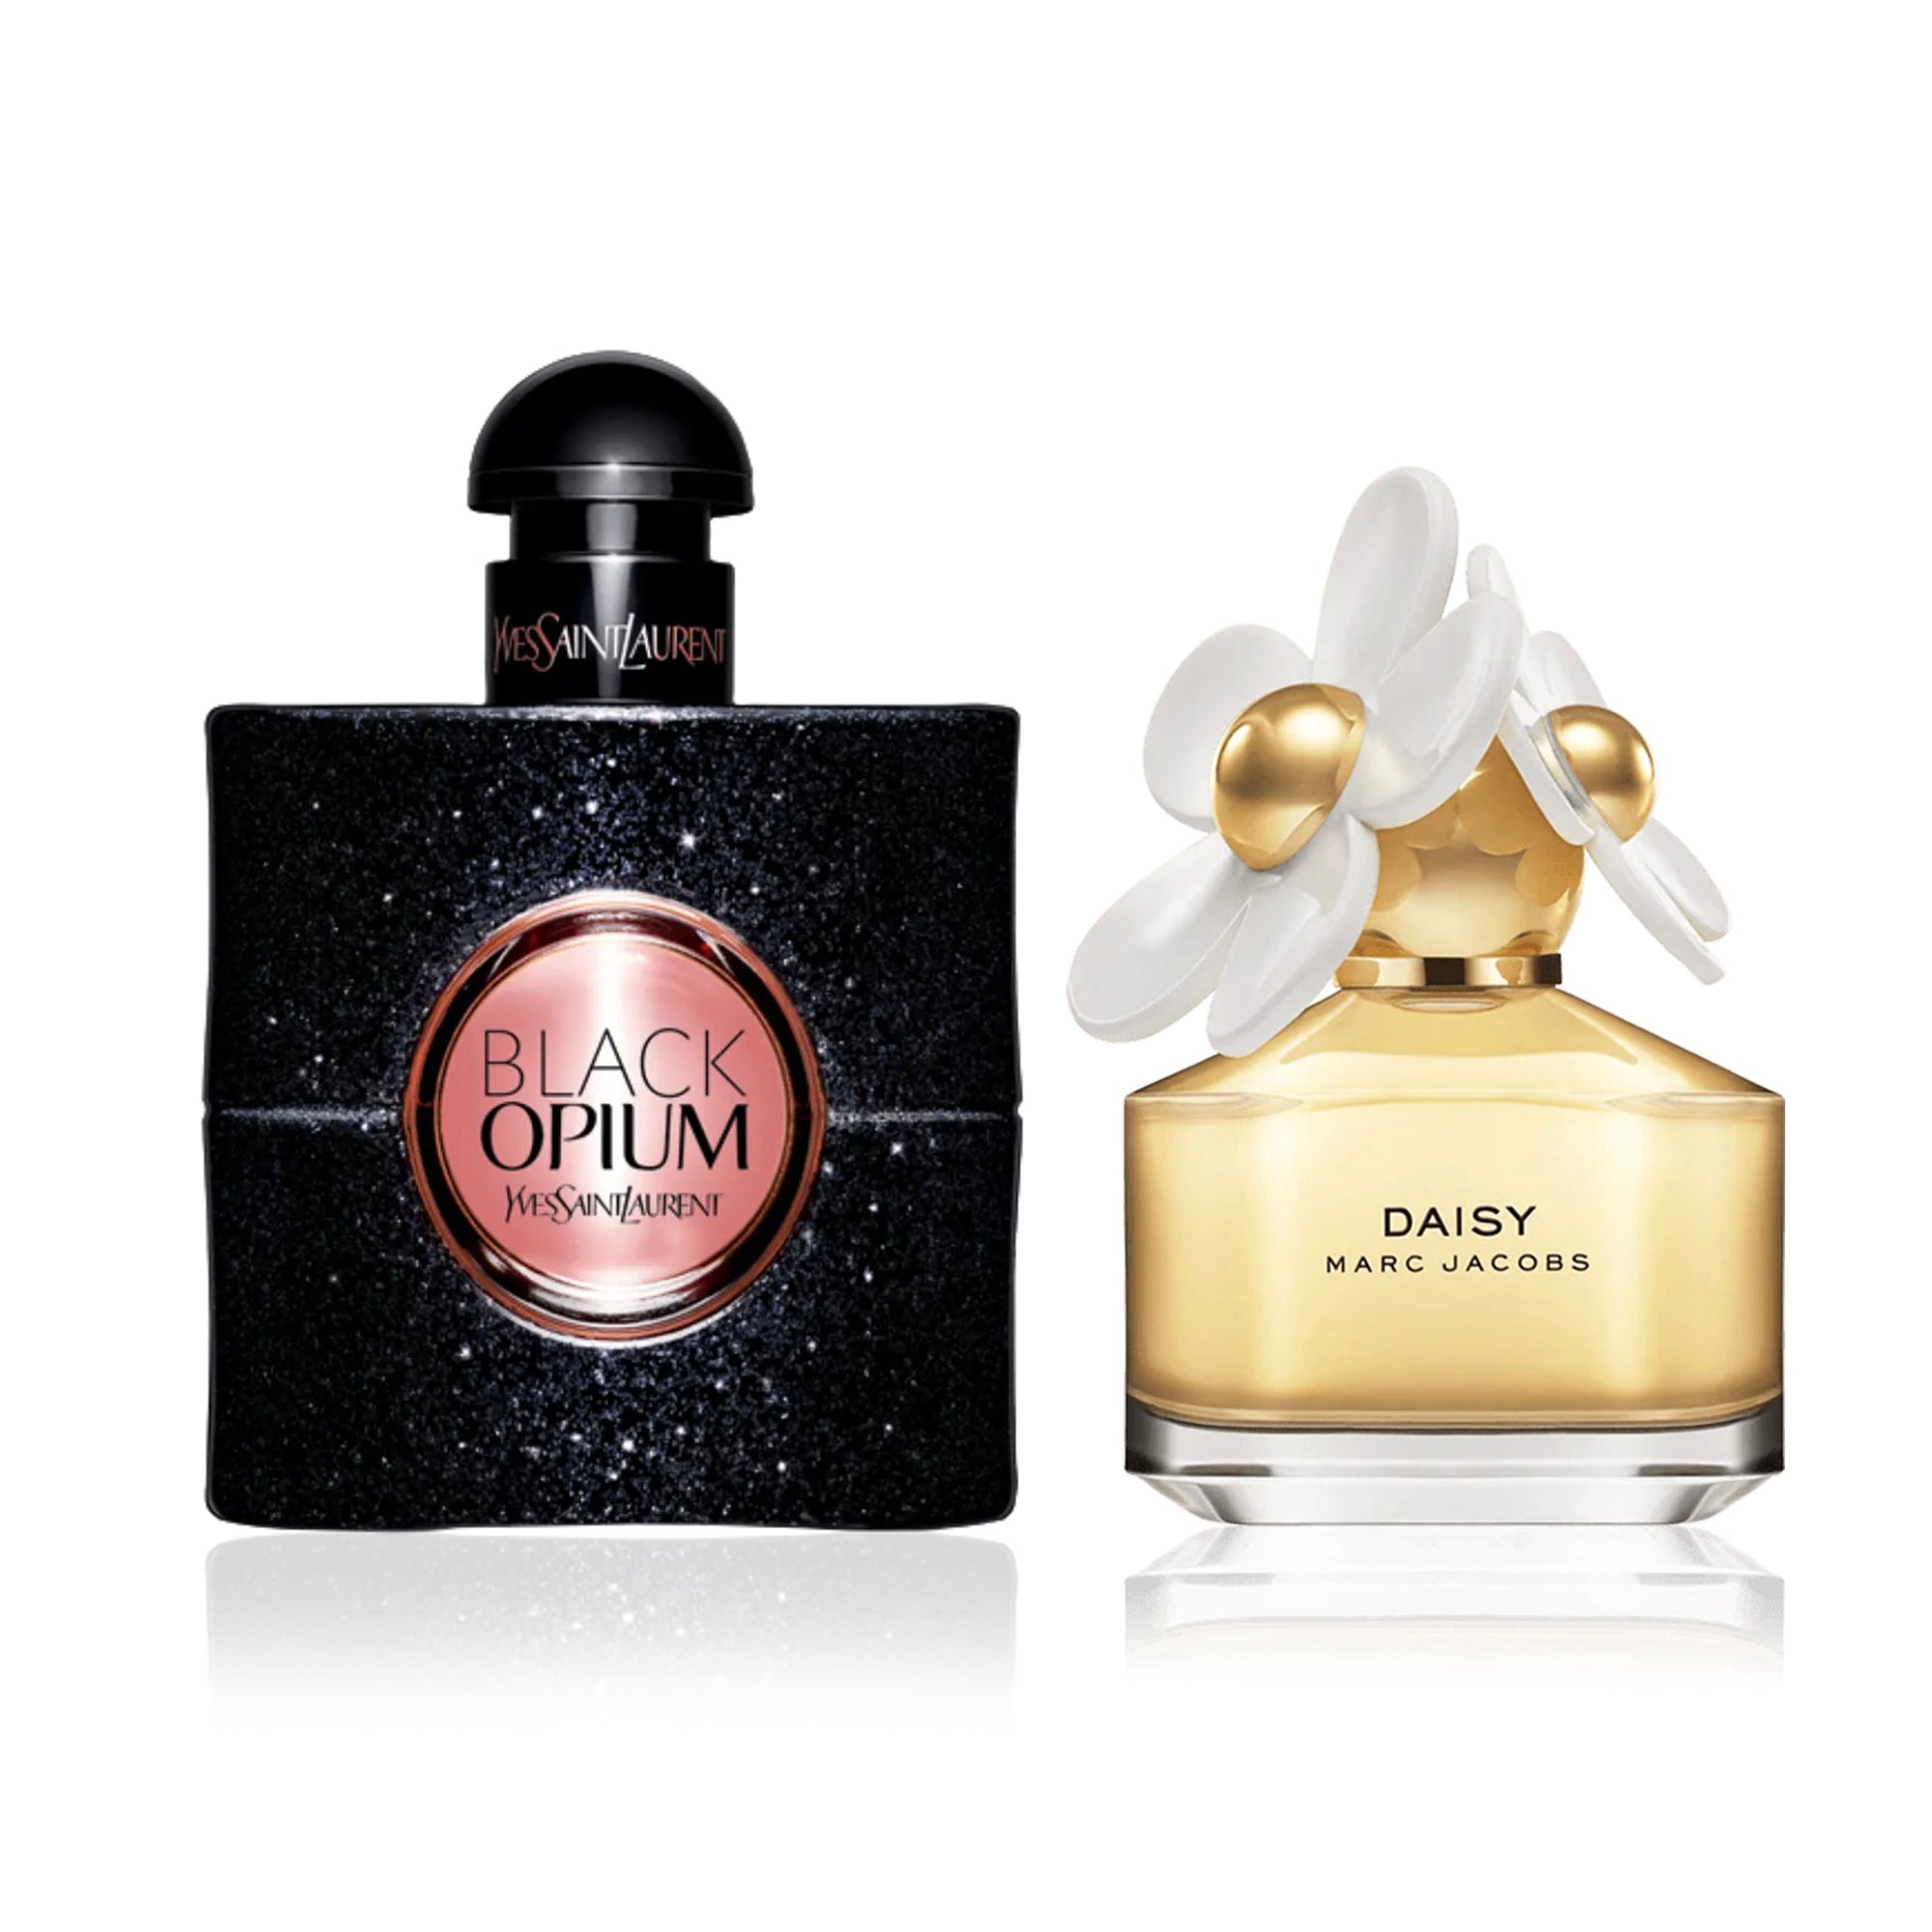 Bundle for Women: Daisy by Marc Jacobs and Black Opium by Yves Saint Laurent, Product image 1